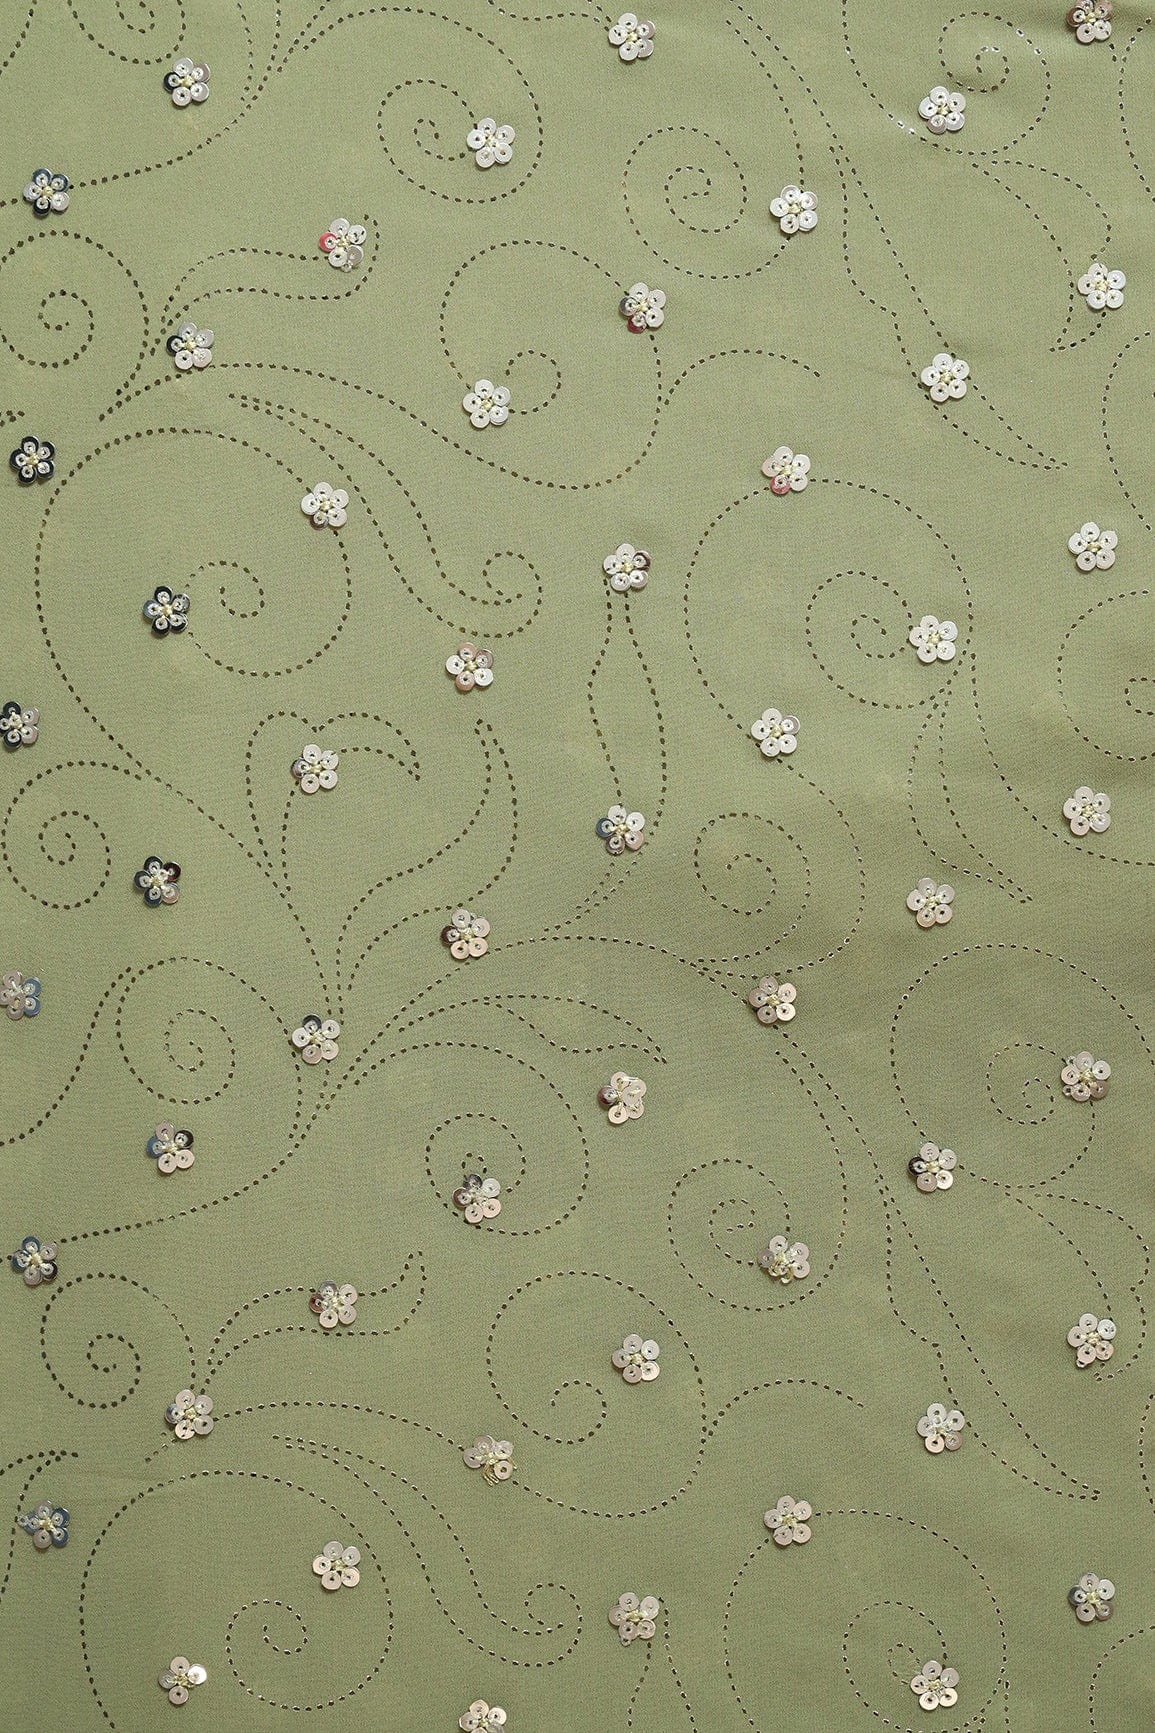 doeraa Embroidery Fabrics Silver Sequins Floral Embroidery With Laser Cut Foil Print On Olive Georgette Fabric